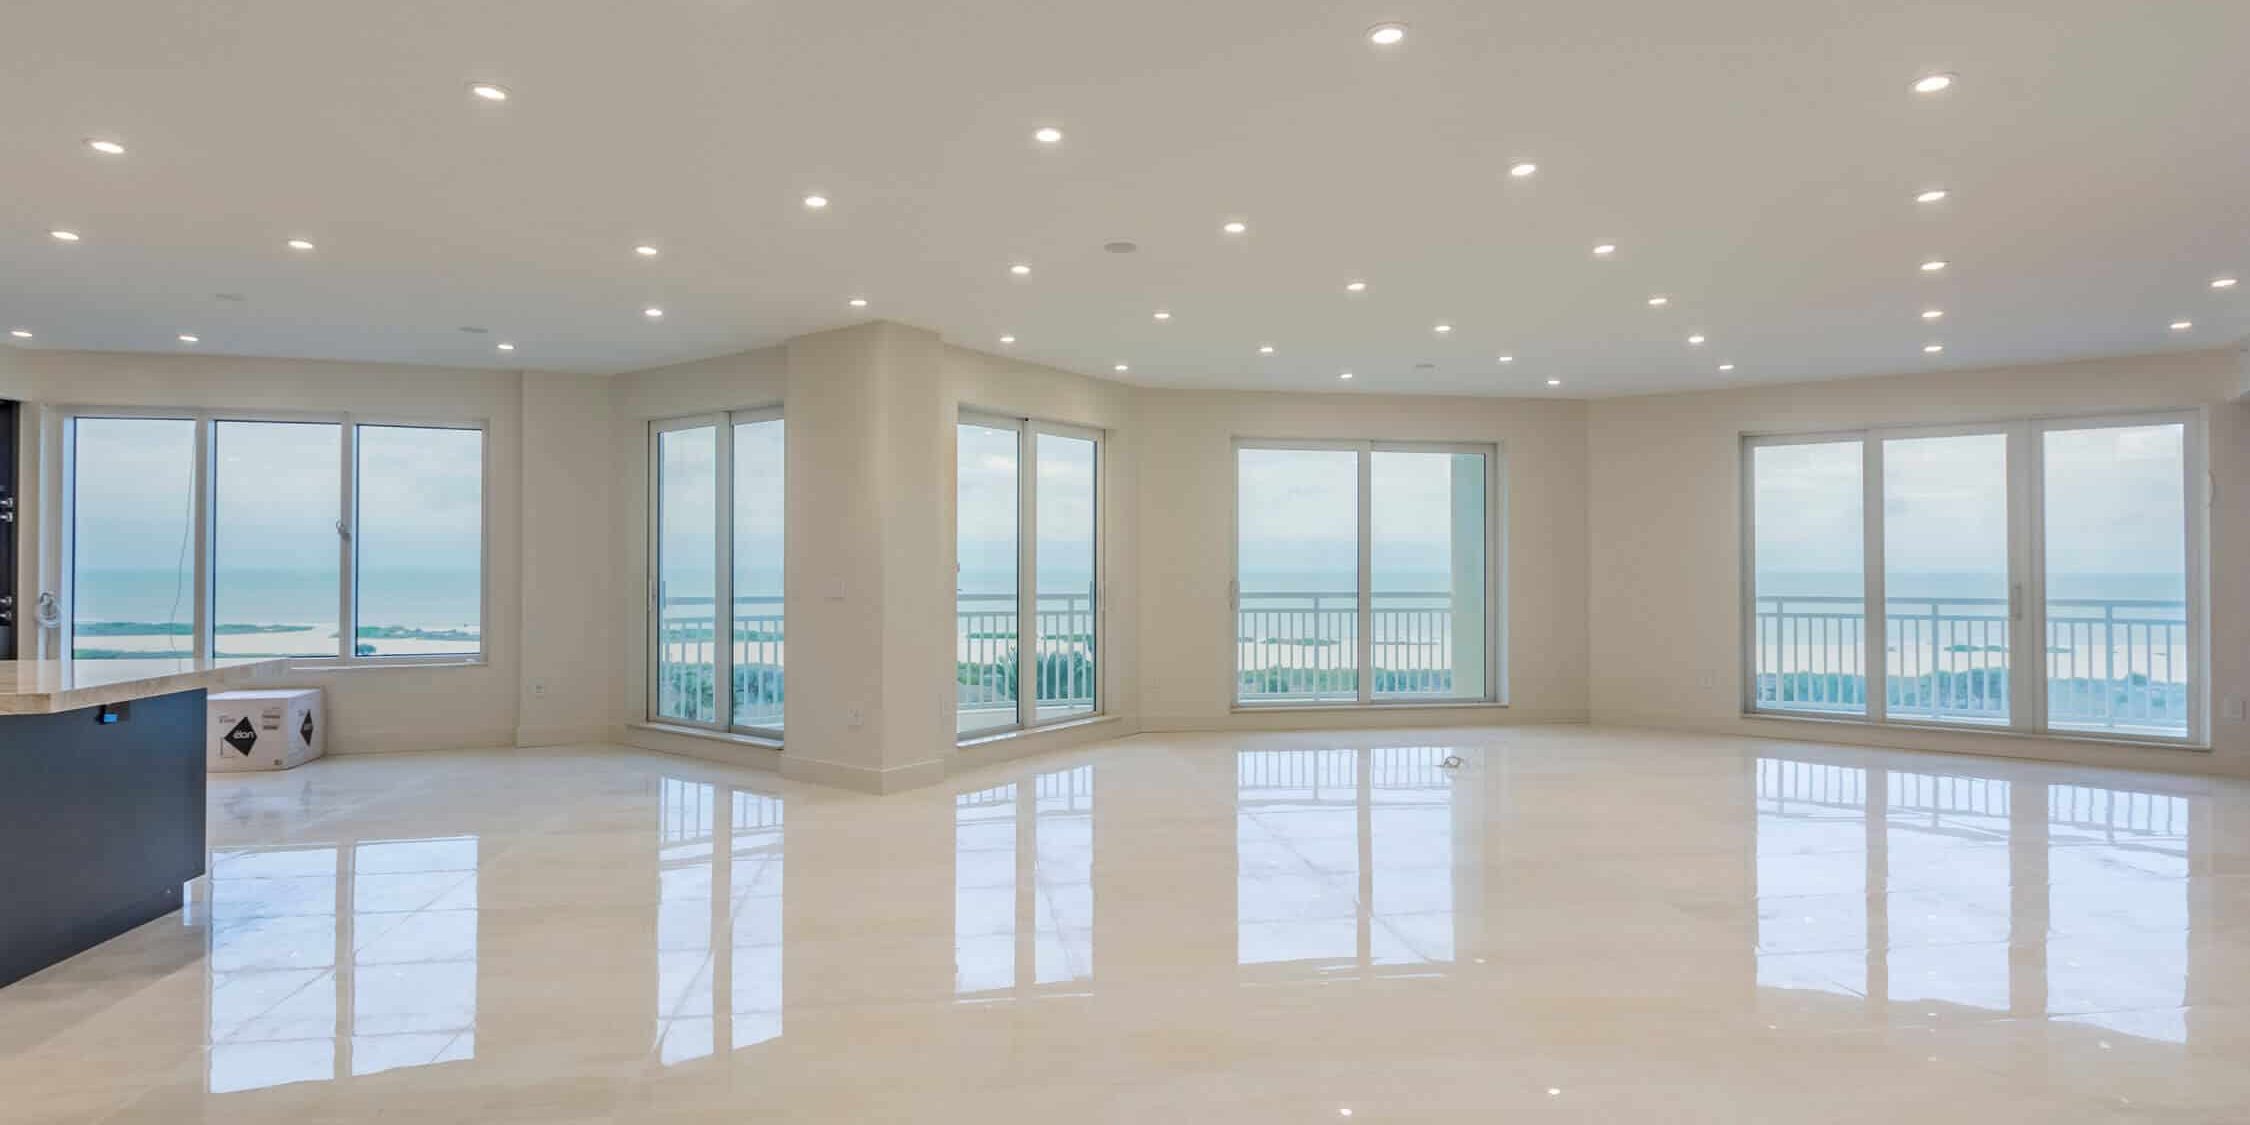 Condo Remodeling in Clearwater